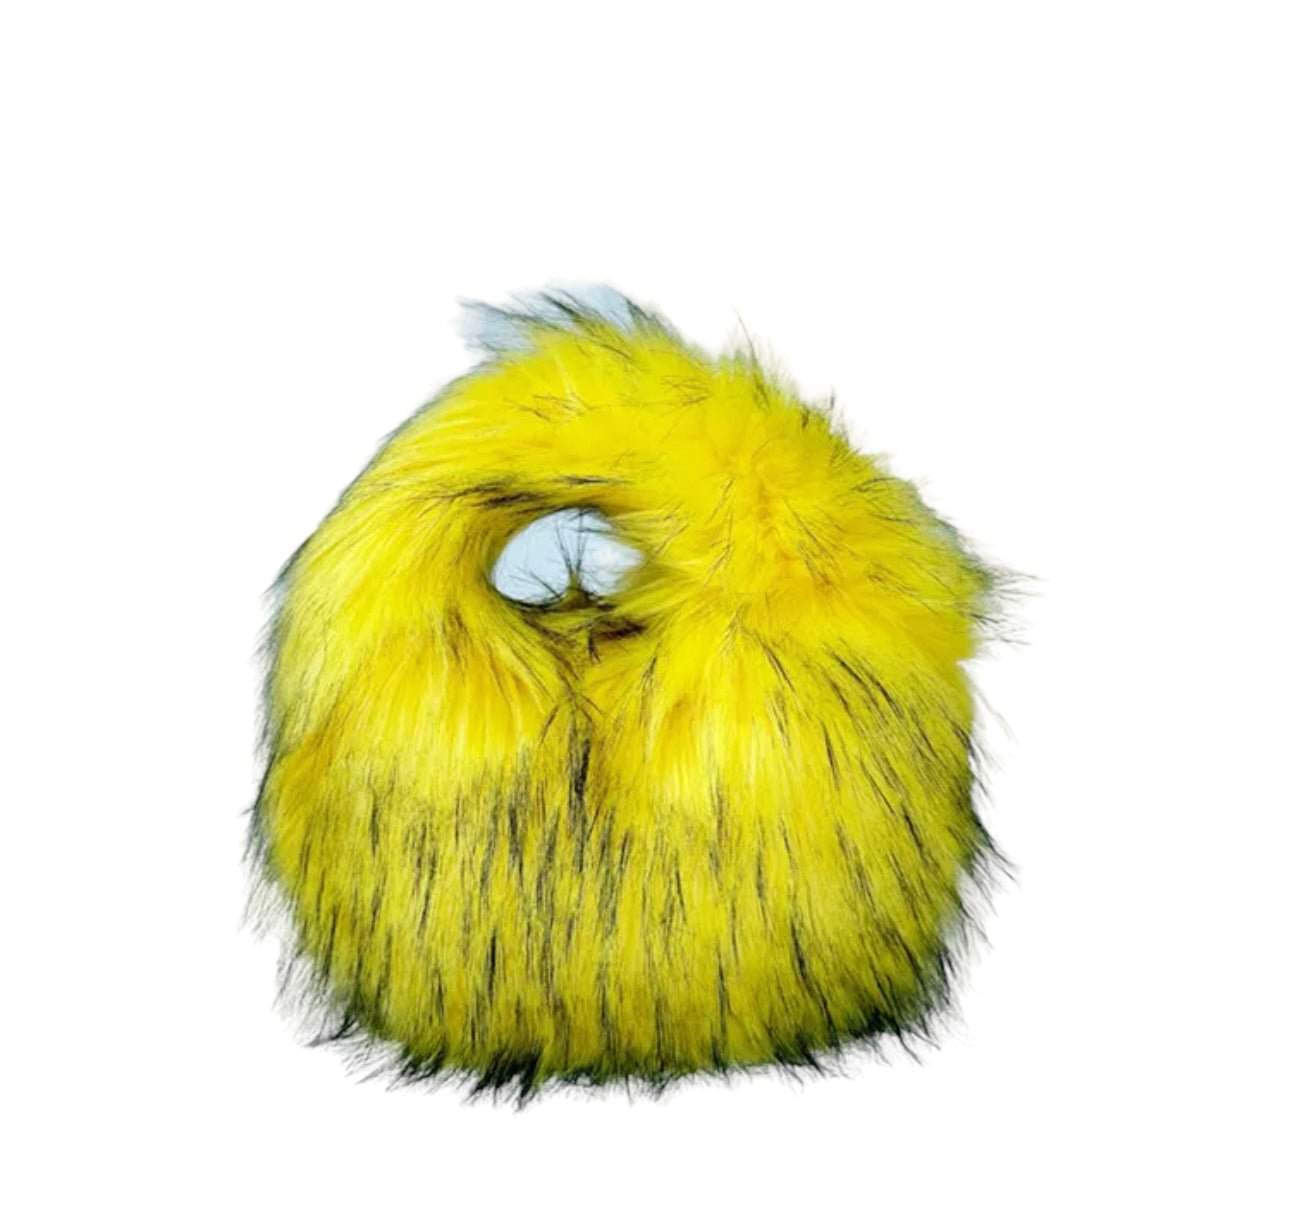 Fuzzy Feeling Bag - Accessories spo-cs-disabled, spo-default, spo-disabled, spo-notify-me-disabled